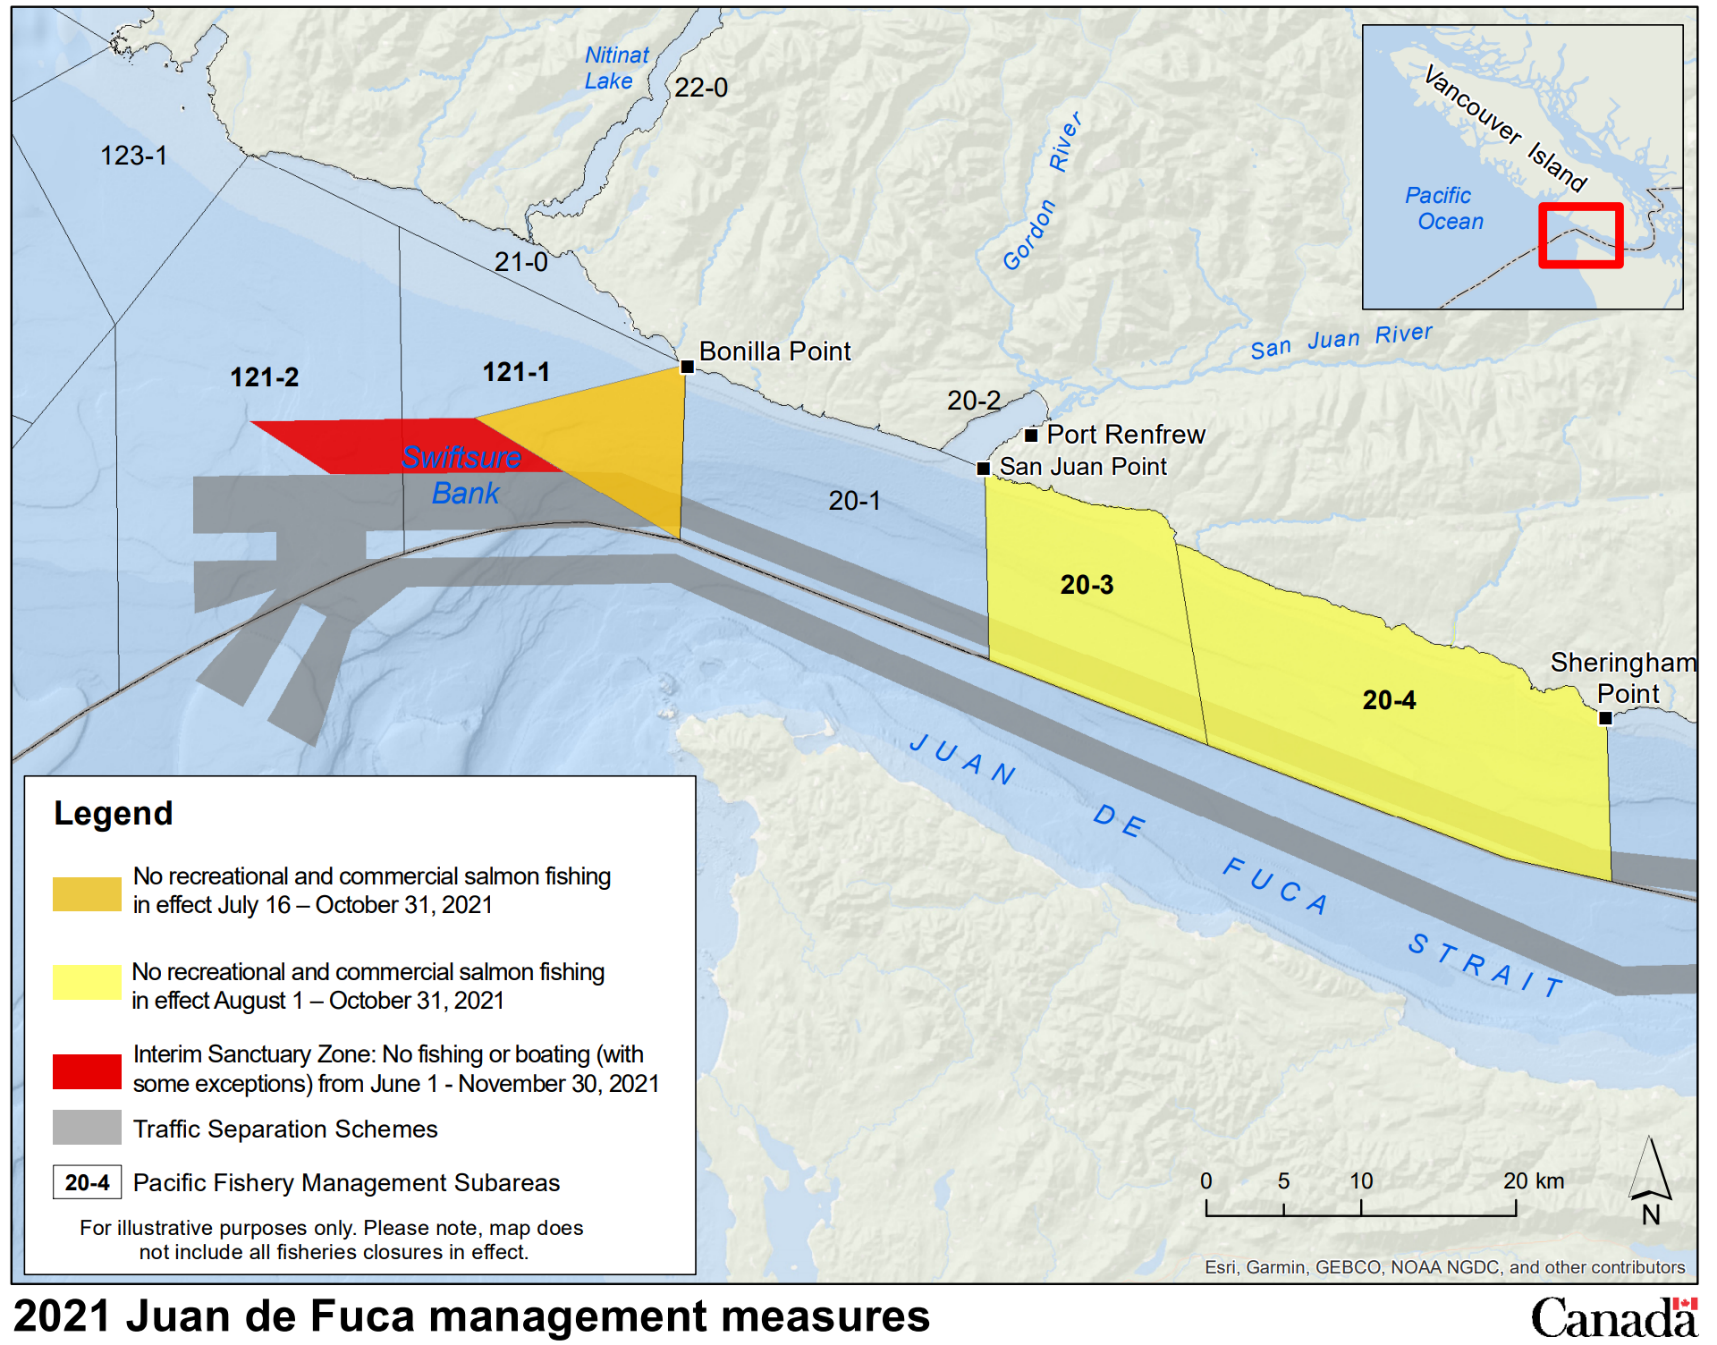 Map showing the recreational and commercial salmon fishing prohibited areas (orange zone and yellow zones), the Interim Sanctuary Zone (red zone), the Traffic Separation Schemes (in gray) and the Pacific Fishery Management Subareas (numbered).